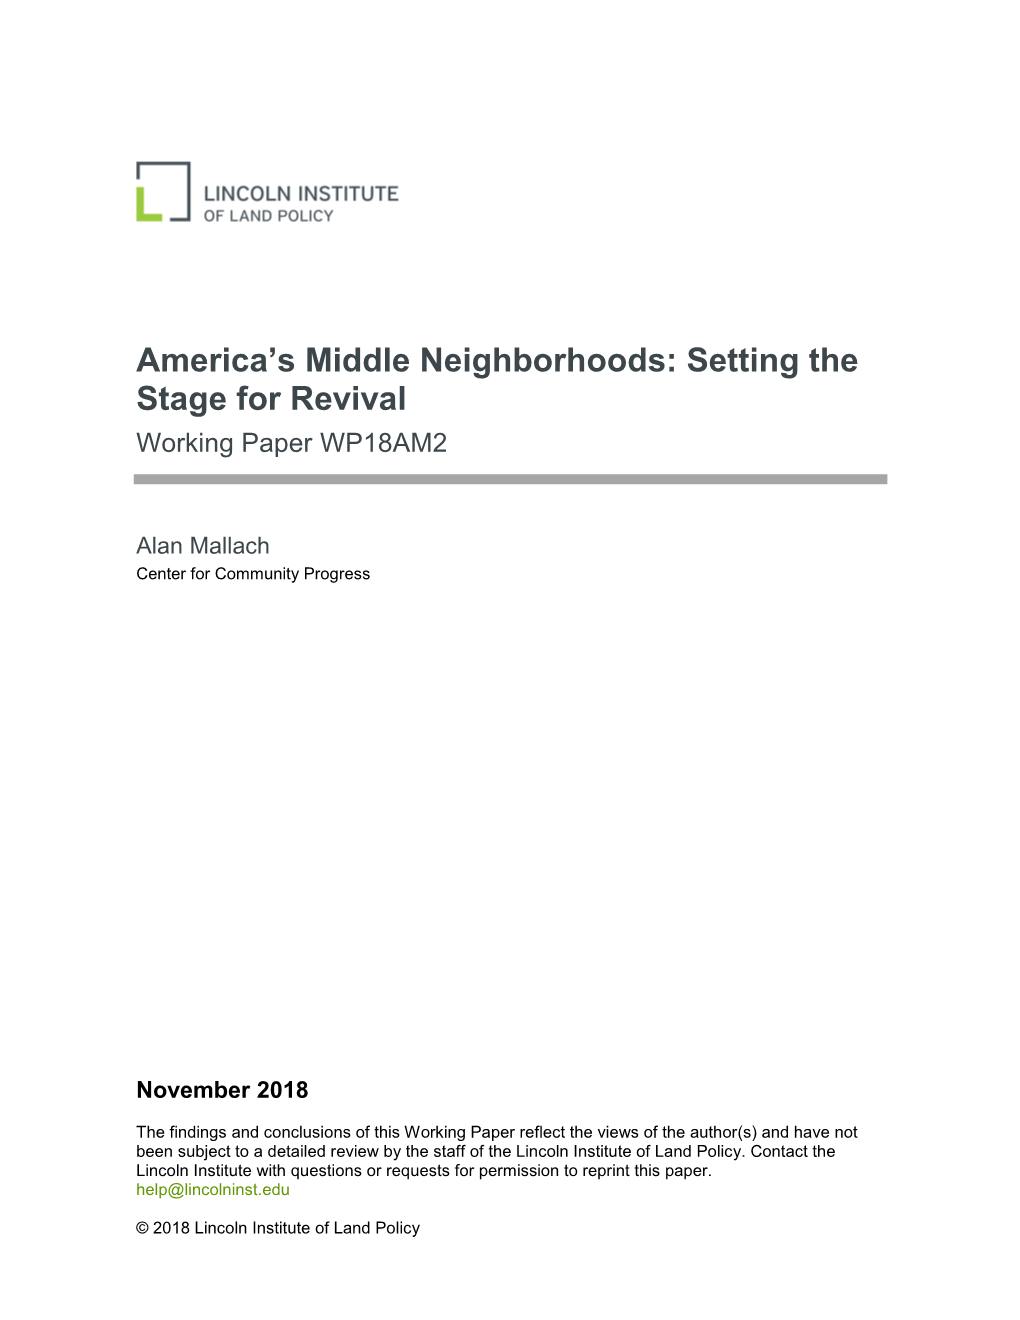 America's Middle Neighborhoods: Setting the Stage for Revival